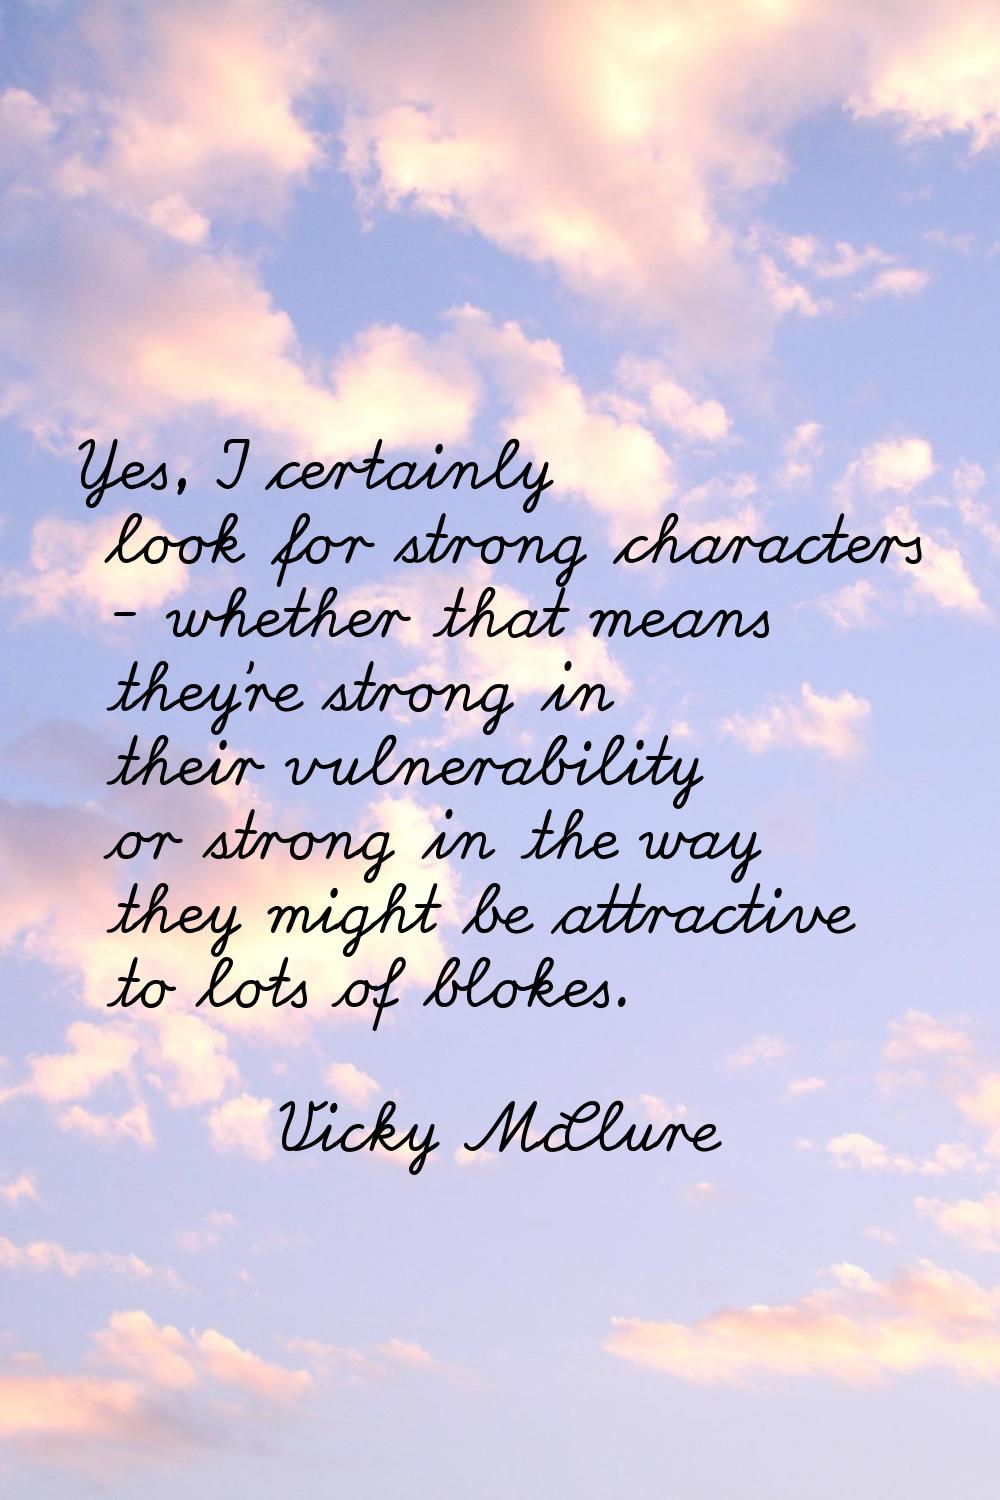 Yes, I certainly look for strong characters - whether that means they're strong in their vulnerabil